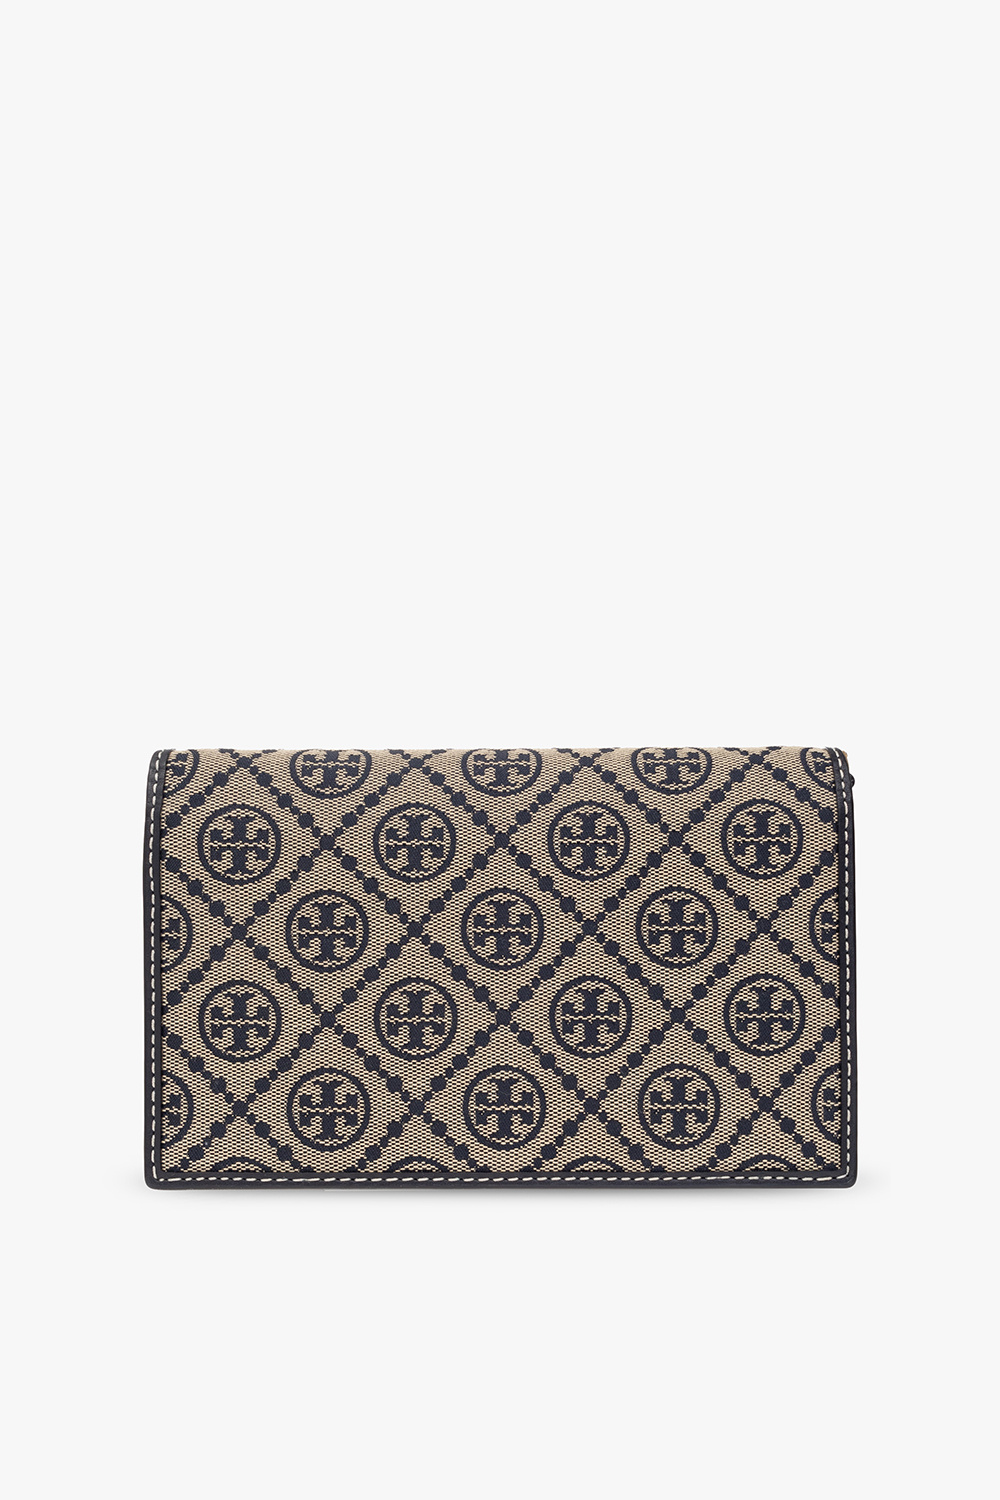 Tory Burch ‘Robinson’ Wallet with Strap Women's Pink | Vitkac